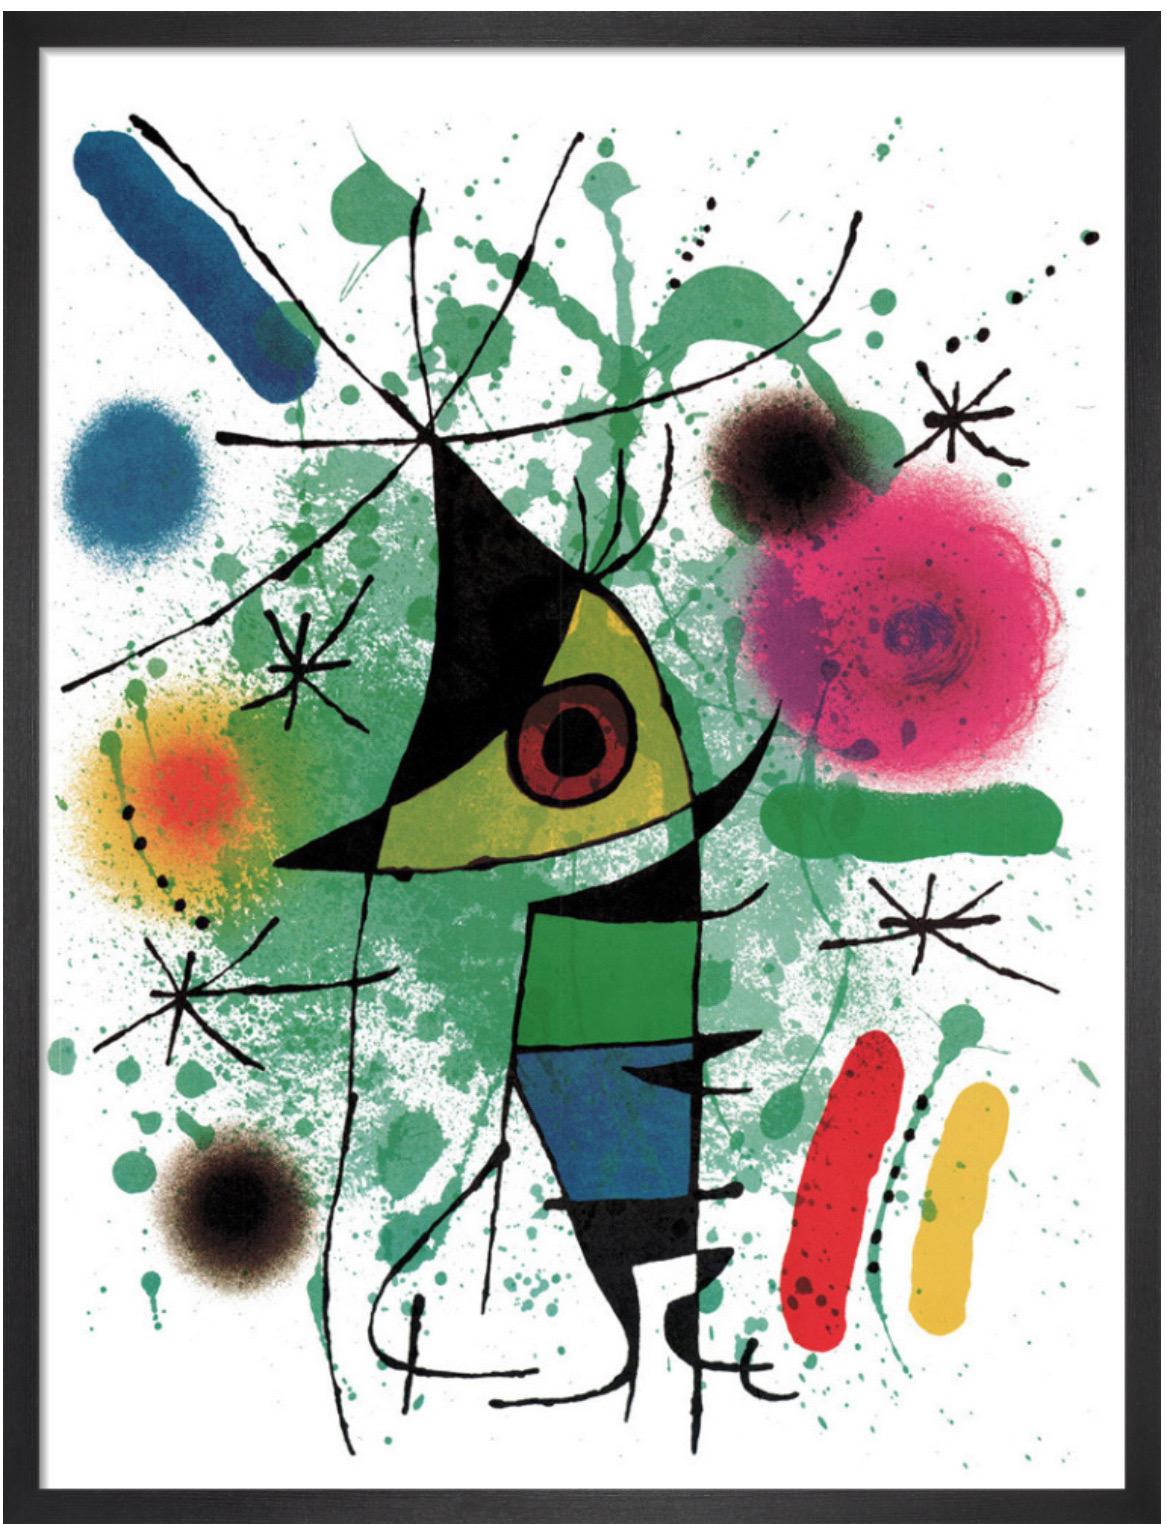 Joan Miró, The Singing Fish

Lithograph print 

52 x 64 cm 

This lithograph is framed in a sustainably sourced black box frame with a gallery acrylic glazing. 

'The Singing Fish' by Joan Miro depicts a whimsical, abstracted fish in bold colours